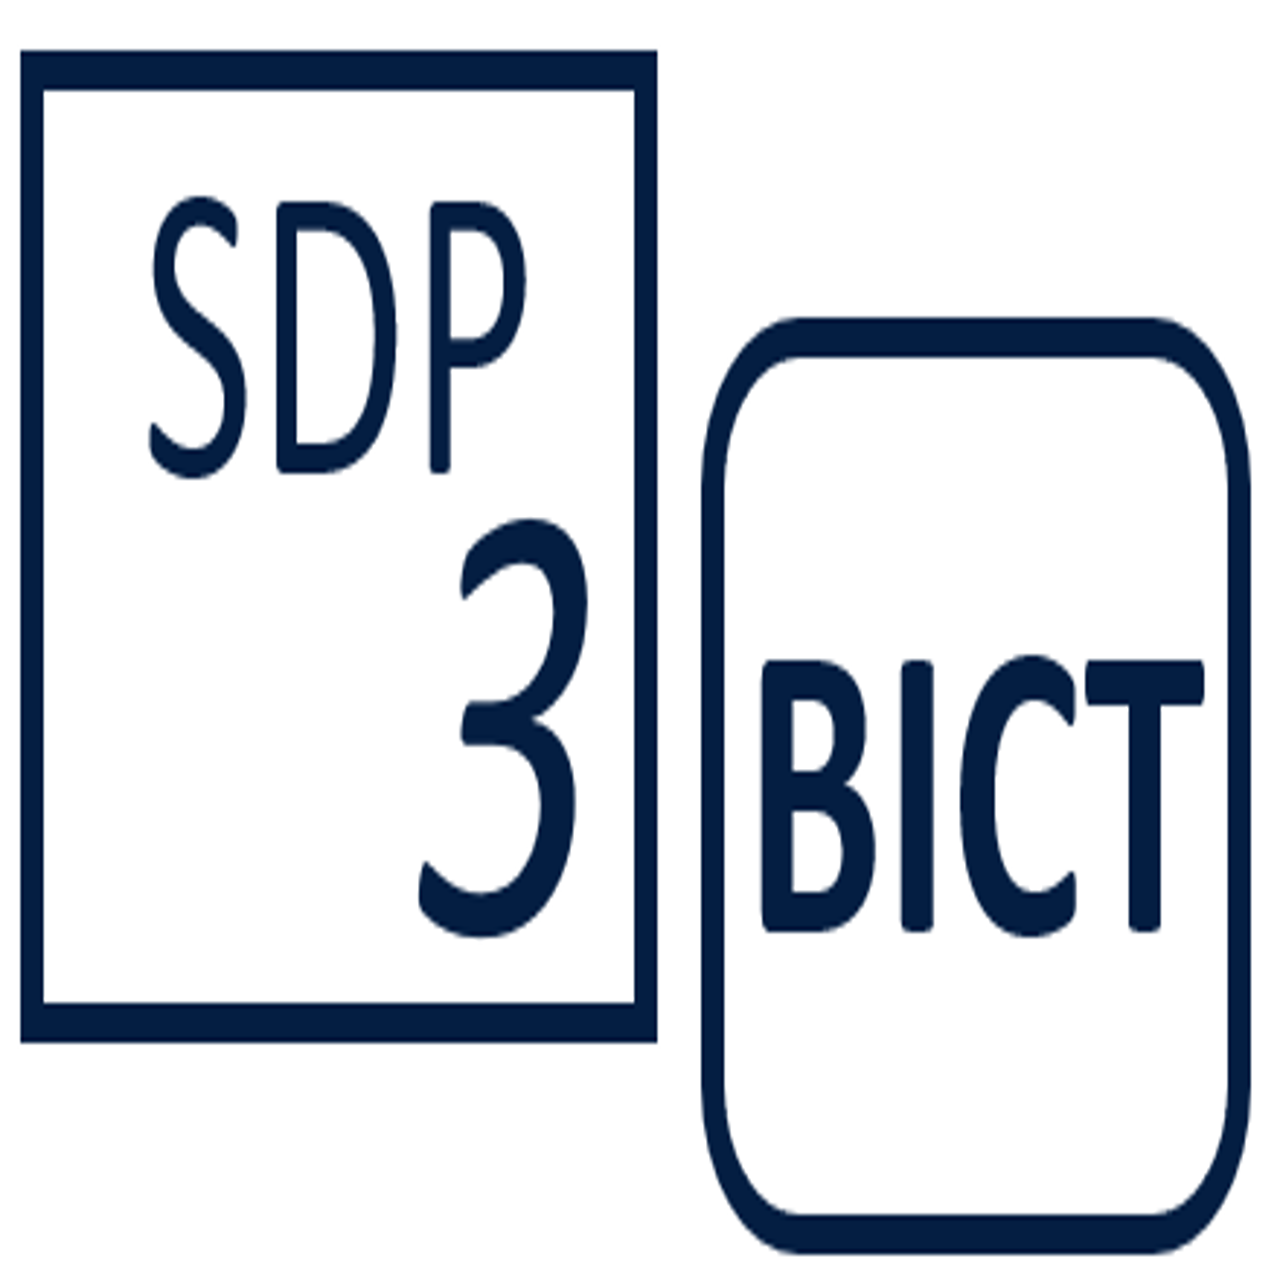 BICT and SDP3